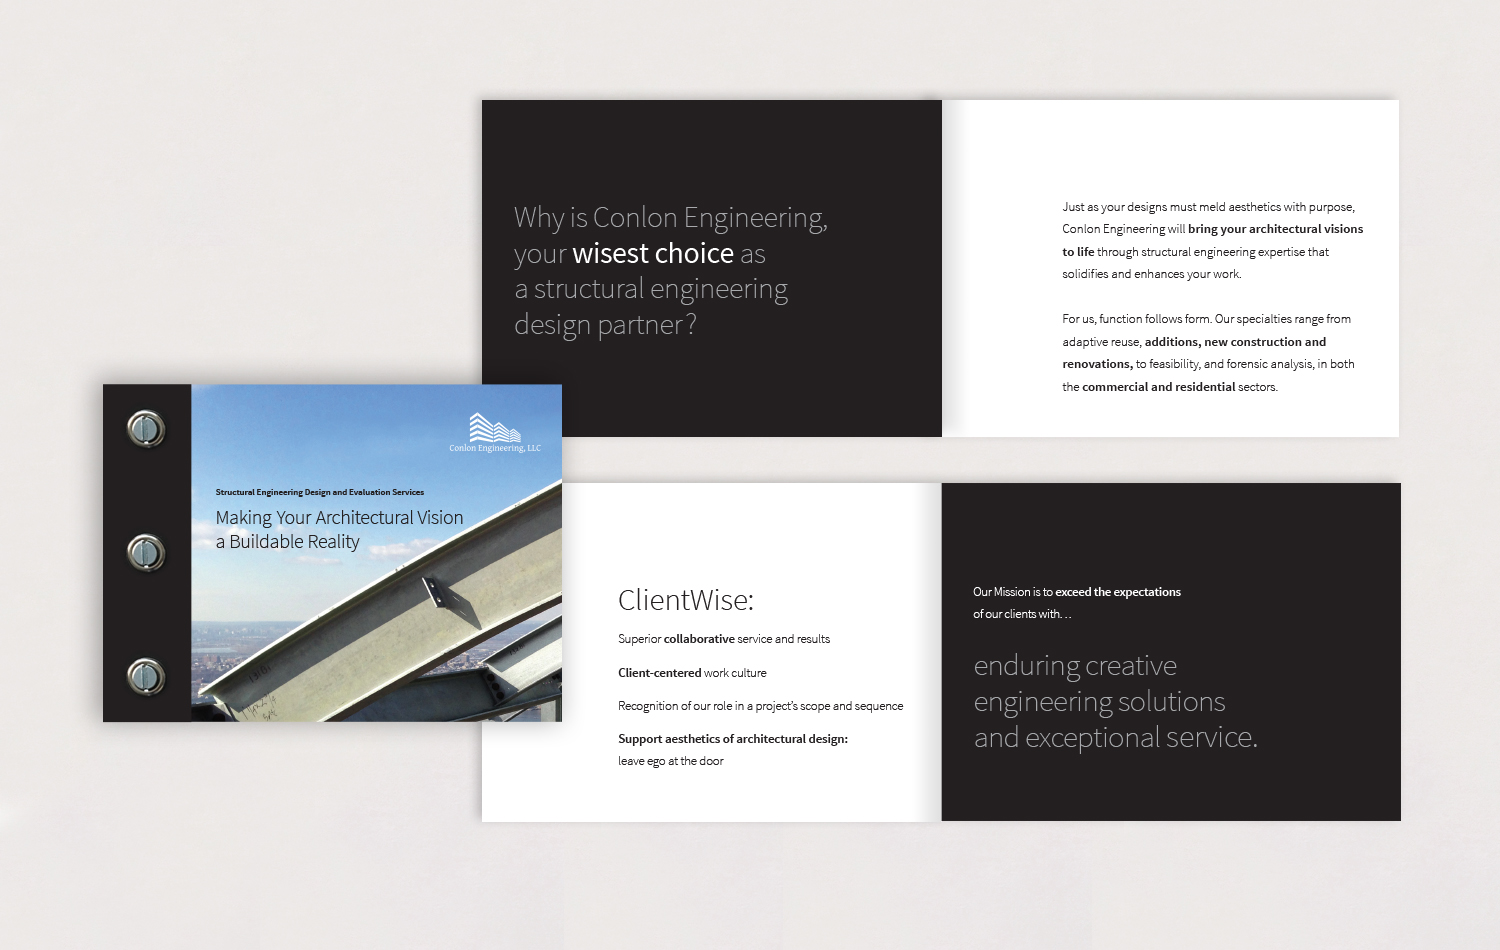 Sample interior pages from an upscale direct mail initiative that describes the services provided by Conlon Engineering